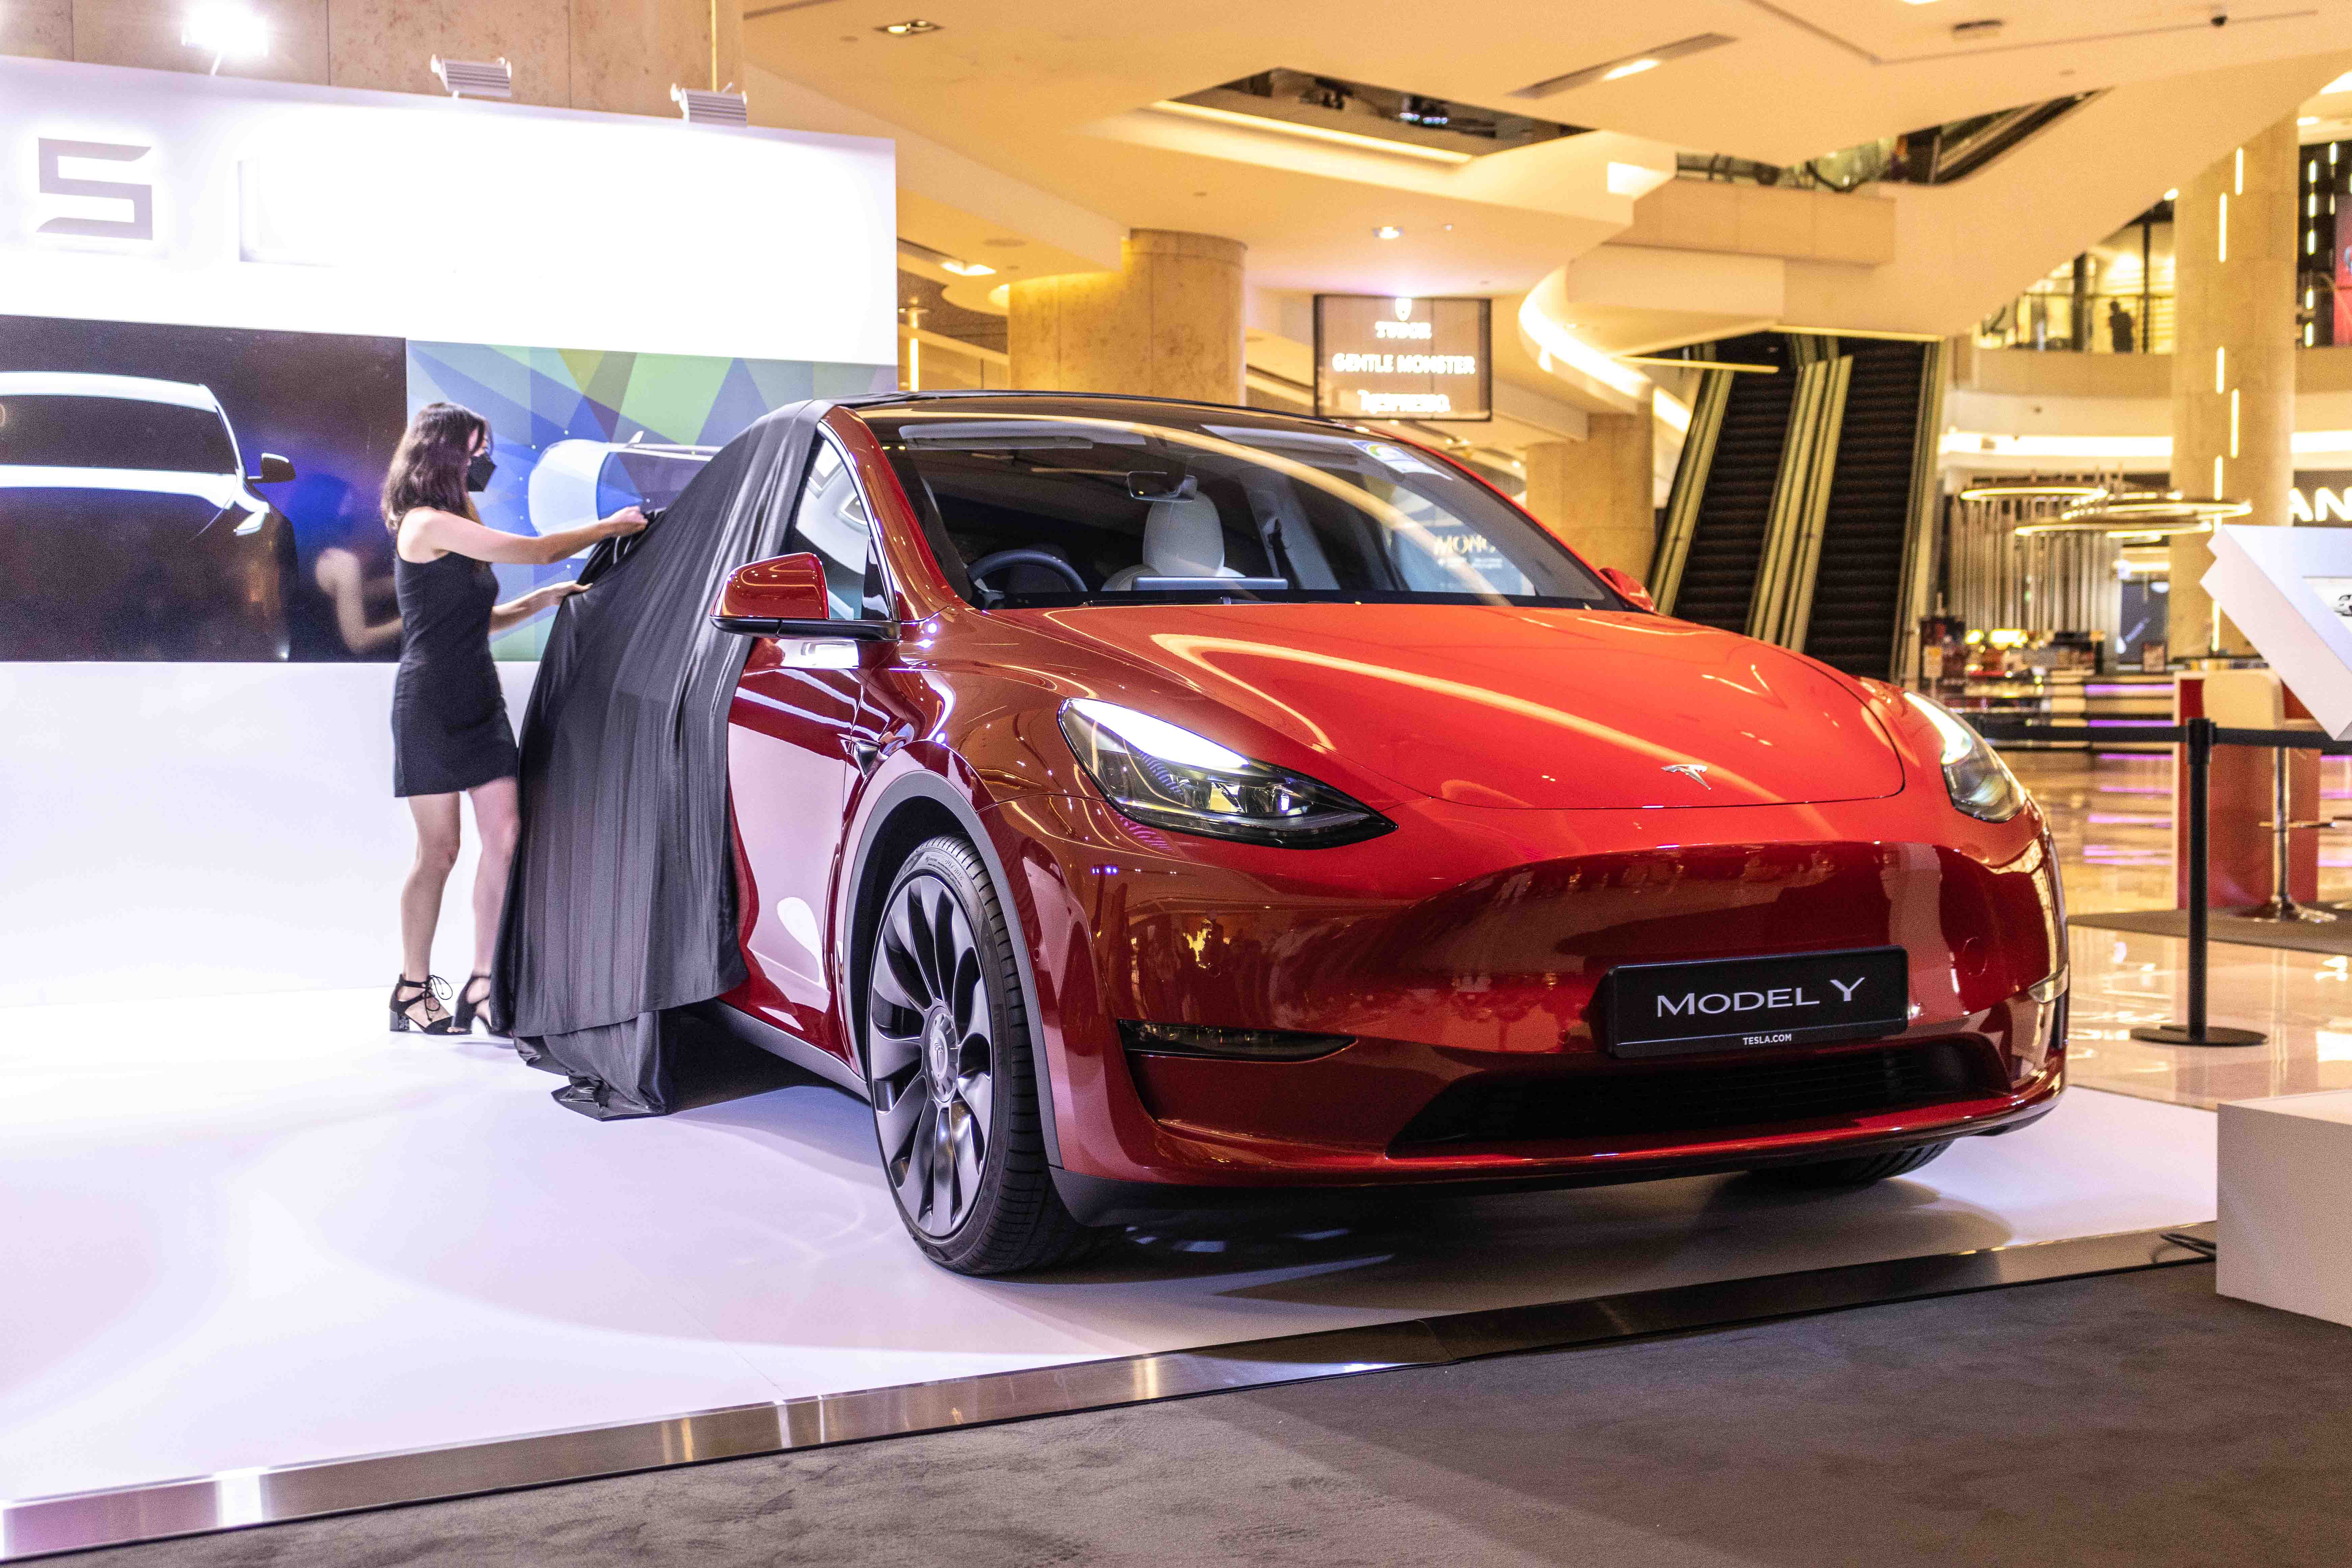 Tesla Model Y Singapore launch - ION Orchard